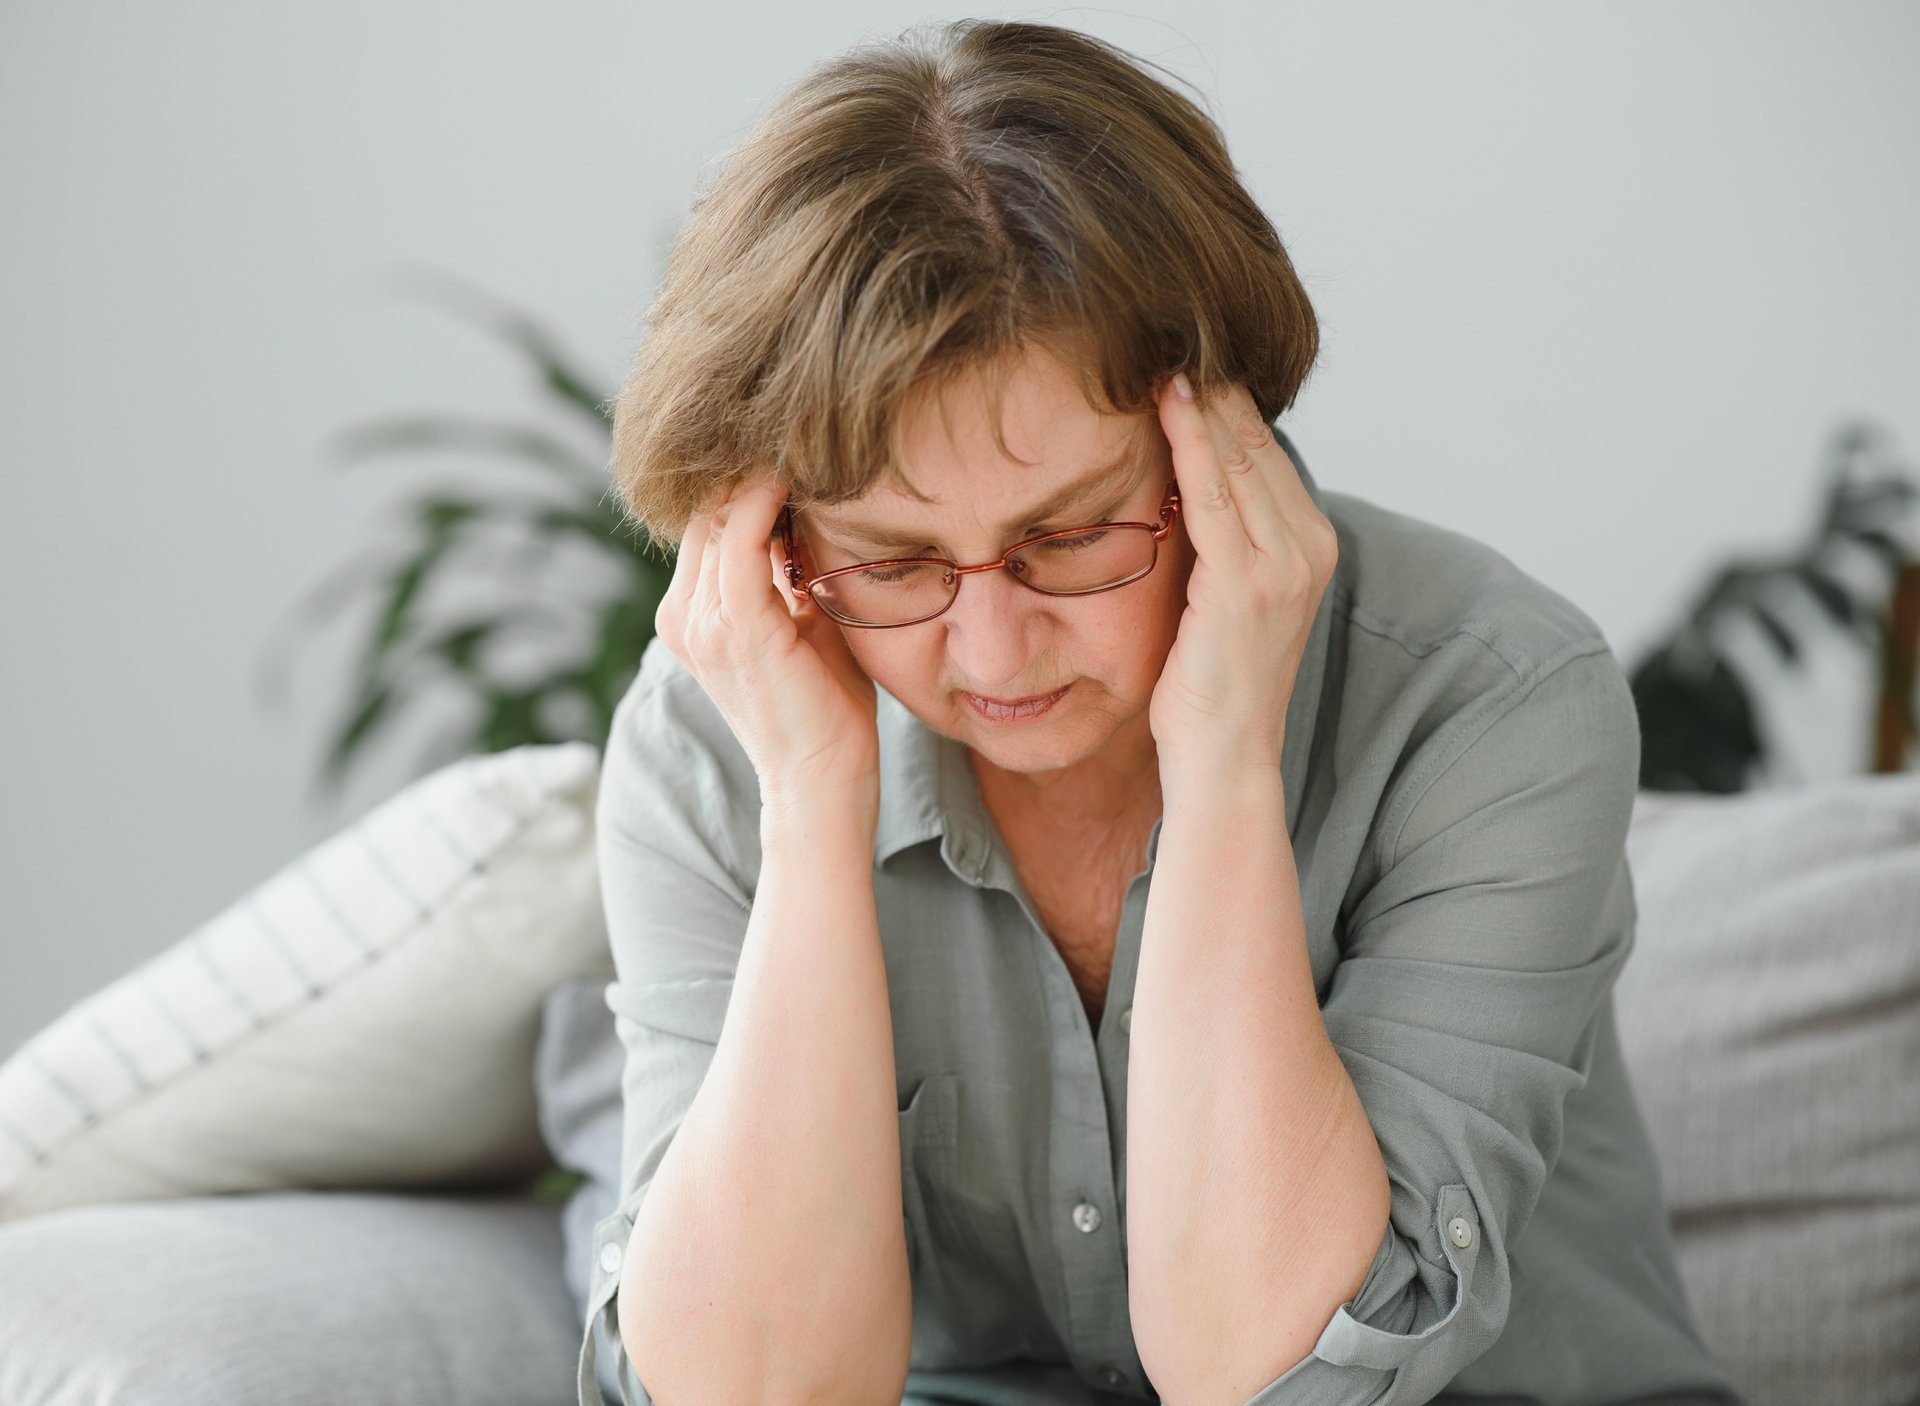 News Picture: More Stress, Higher Odds for A-Fib in Women After Menopause